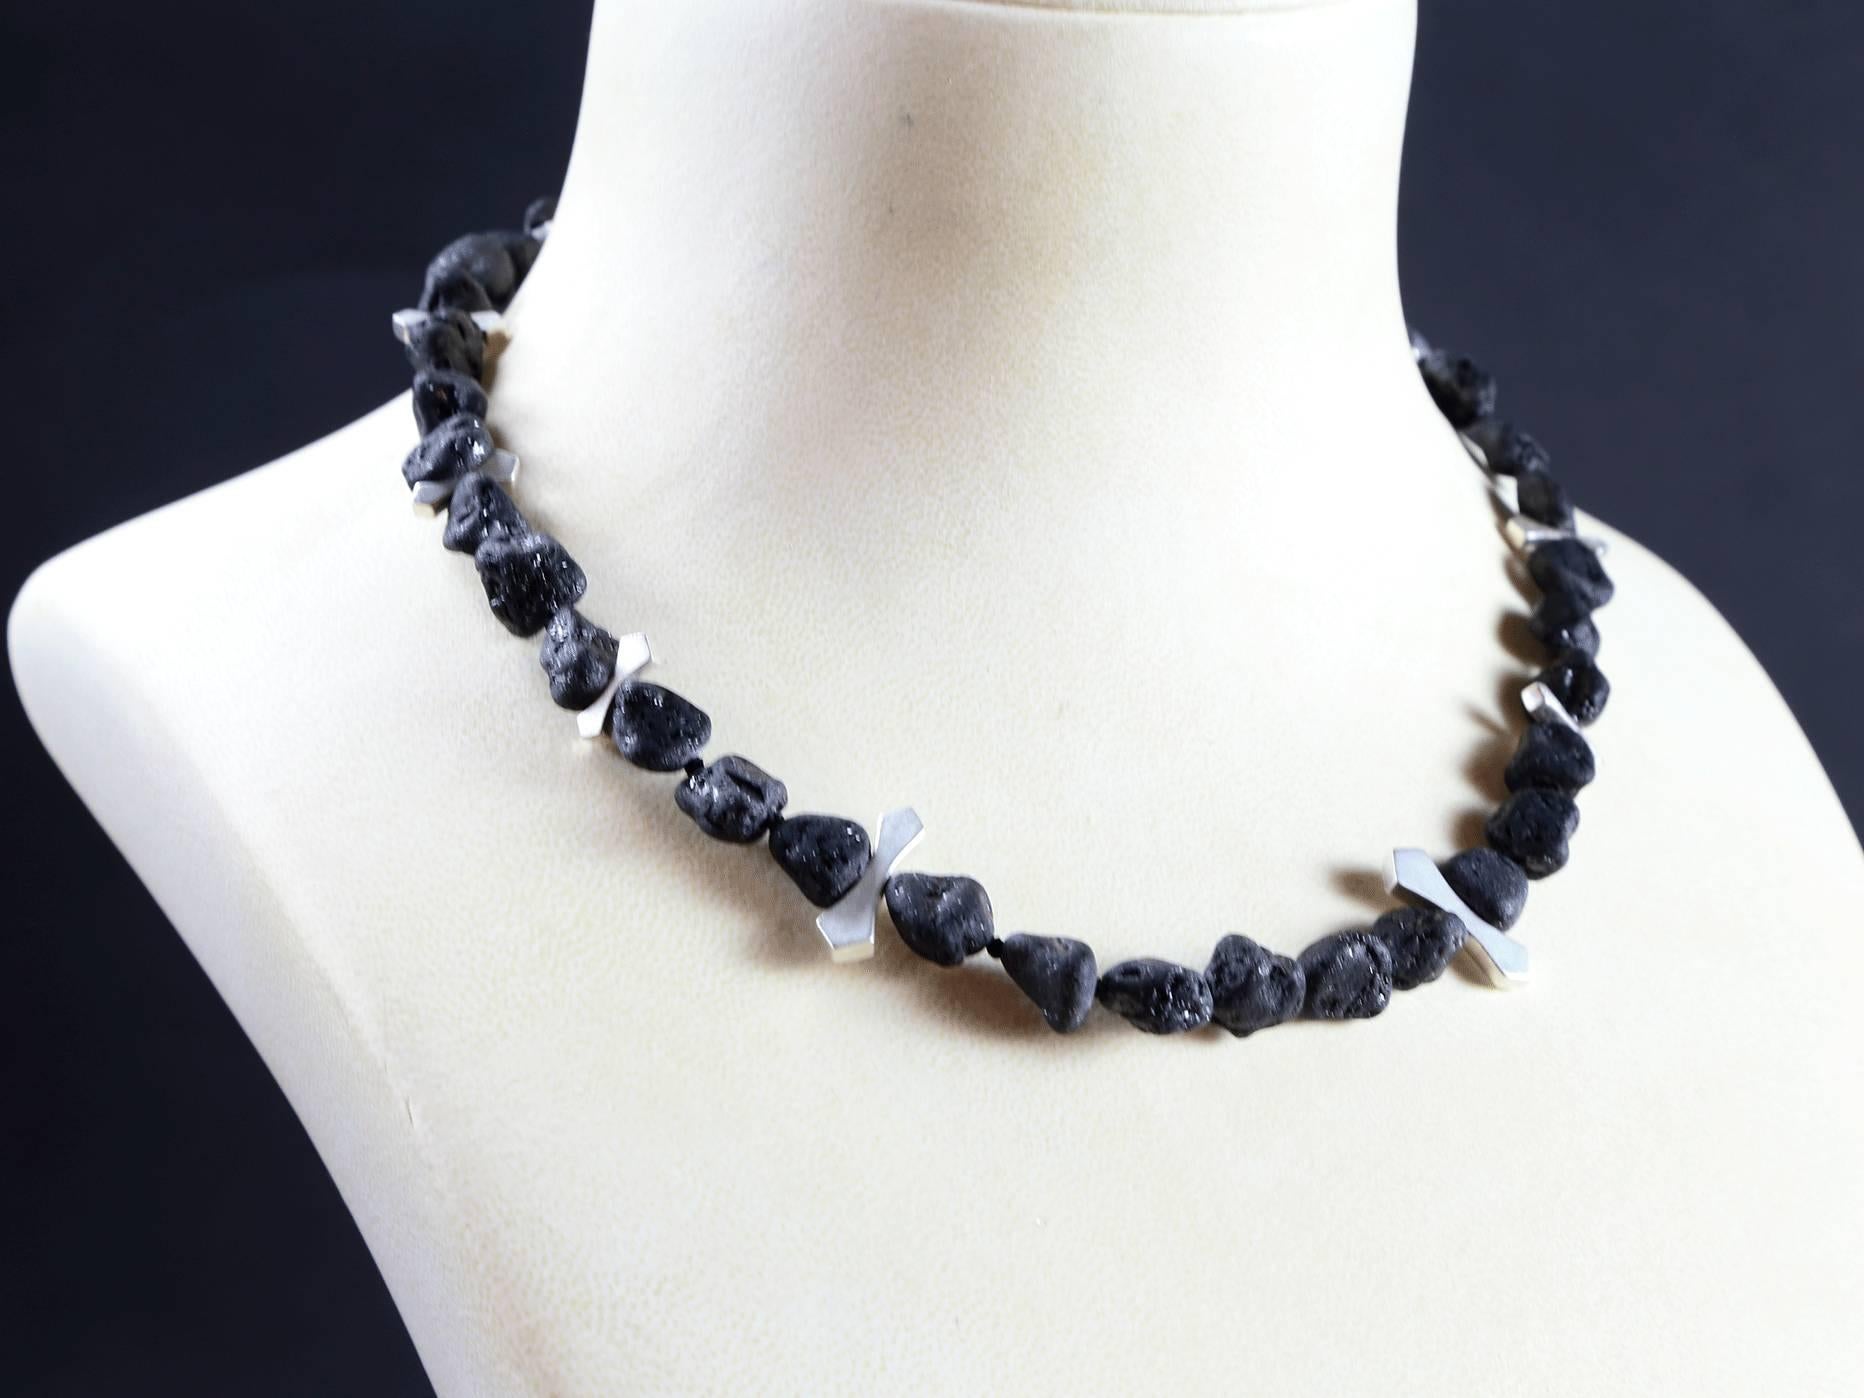 Beautiful Natural black lava nugget necklace. The hand knotted nuggets are inter-spaced with sterling silver tablets, and fastened with a sterling silver double-S hook.  Lava is known for its healing properties endowed through its close proximity to